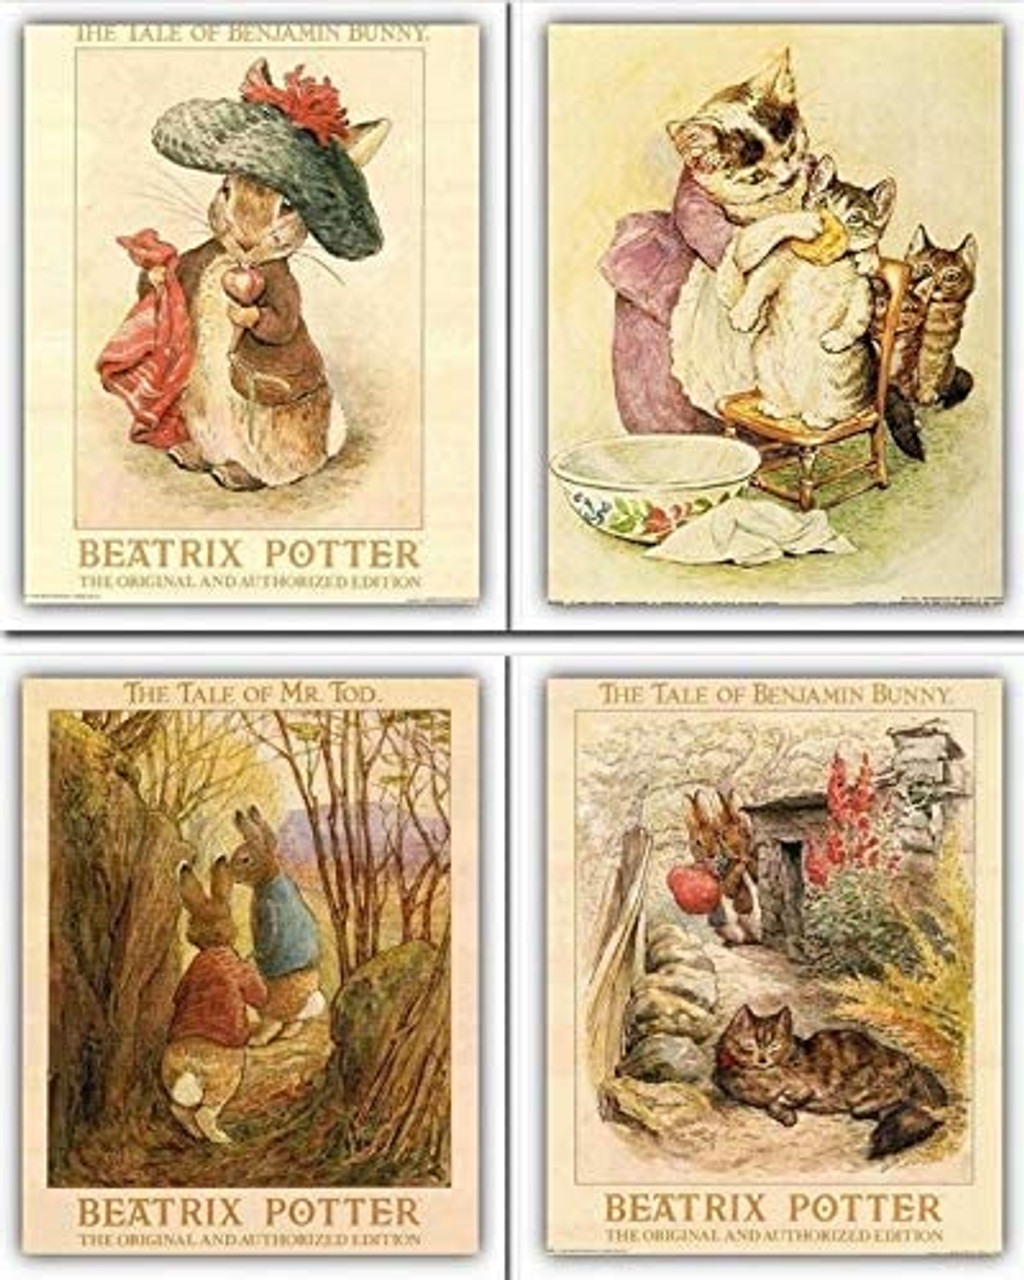 Beatrix Potter Bunny Rabbit Childrens Kids Room Original and Authorized  Edition Wall Decor Espresso Framed Picture Art Print (20x24) - Impact  Posters Gallery